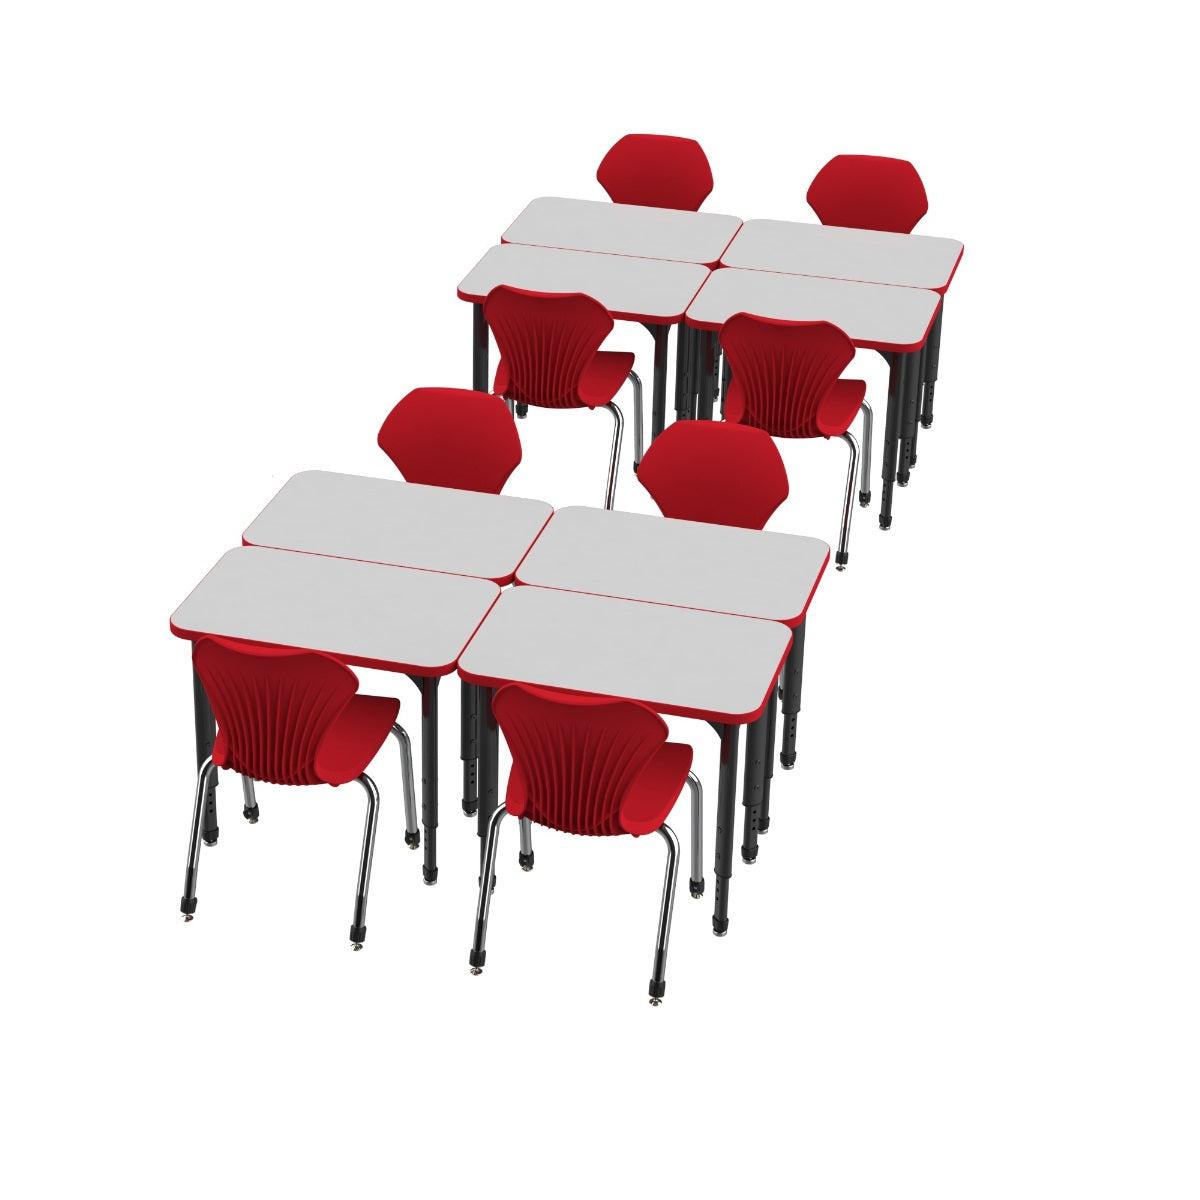 Apex Dry Erase Classroom Desk and Chair Package, 8 Rectangle Collaborative Student Desks, 24" x 36", with 8 Apex Stack Chairs